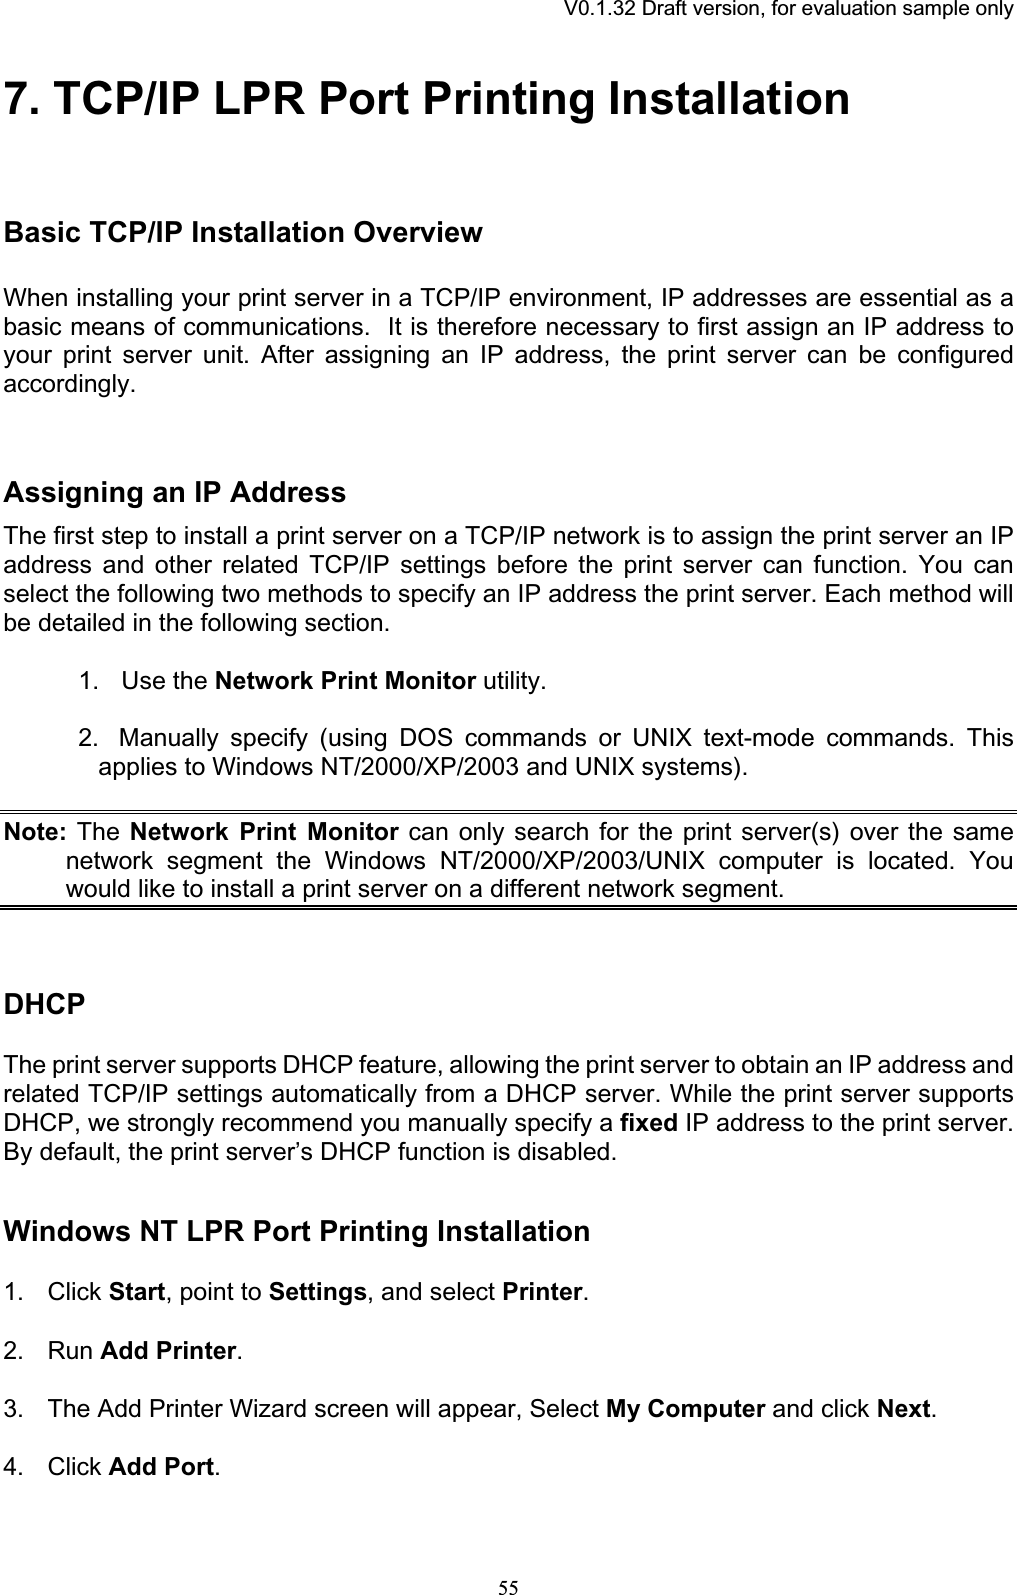 V0.1.32 Draft version, for evaluation sample only7. TCP/IP LPR Port Printing InstallationBasic TCP/IP Installation Overview When installing your print server in a TCP/IP environment, IP addresses are essential as a basic means of communications.  It is therefore necessary to first assign an IP address to your print server unit. After assigning an IP address, the print server can be configured accordingly.Assigning an IP Address The first step to install a print server on a TCP/IP network is to assign the print server an IP address and other related TCP/IP settings before the print server can function. You can select the following two methods to specify an IP address the print server. Each method will be detailed in the following section. 1.   Use the Network Print Monitor utility. 2. Manually specify (using DOS commands or UNIX text-mode commands. This applies to Windows NT/2000/XP/2003 and UNIX systems). Note: The Network Print Monitor can only search for the print server(s) over the same network segment the Windows NT/2000/XP/2003/UNIX computer is located. You would like to install a print server on a different network segment. DHCPThe print server supports DHCP feature, allowing the print server to obtain an IP address and related TCP/IP settings automatically from a DHCP server. While the print server supports DHCP, we strongly recommend you manually specify a fixed IP address to the print server. By default, the print server’s DHCP function is disabled. Windows NT LPR Port Printing Installation 1. Click Start, point to Settings, and select Printer.2. Run Add Printer.3. The Add Printer Wizard screen will appear, Select My Computer and click Next.4. Click Add Port.55